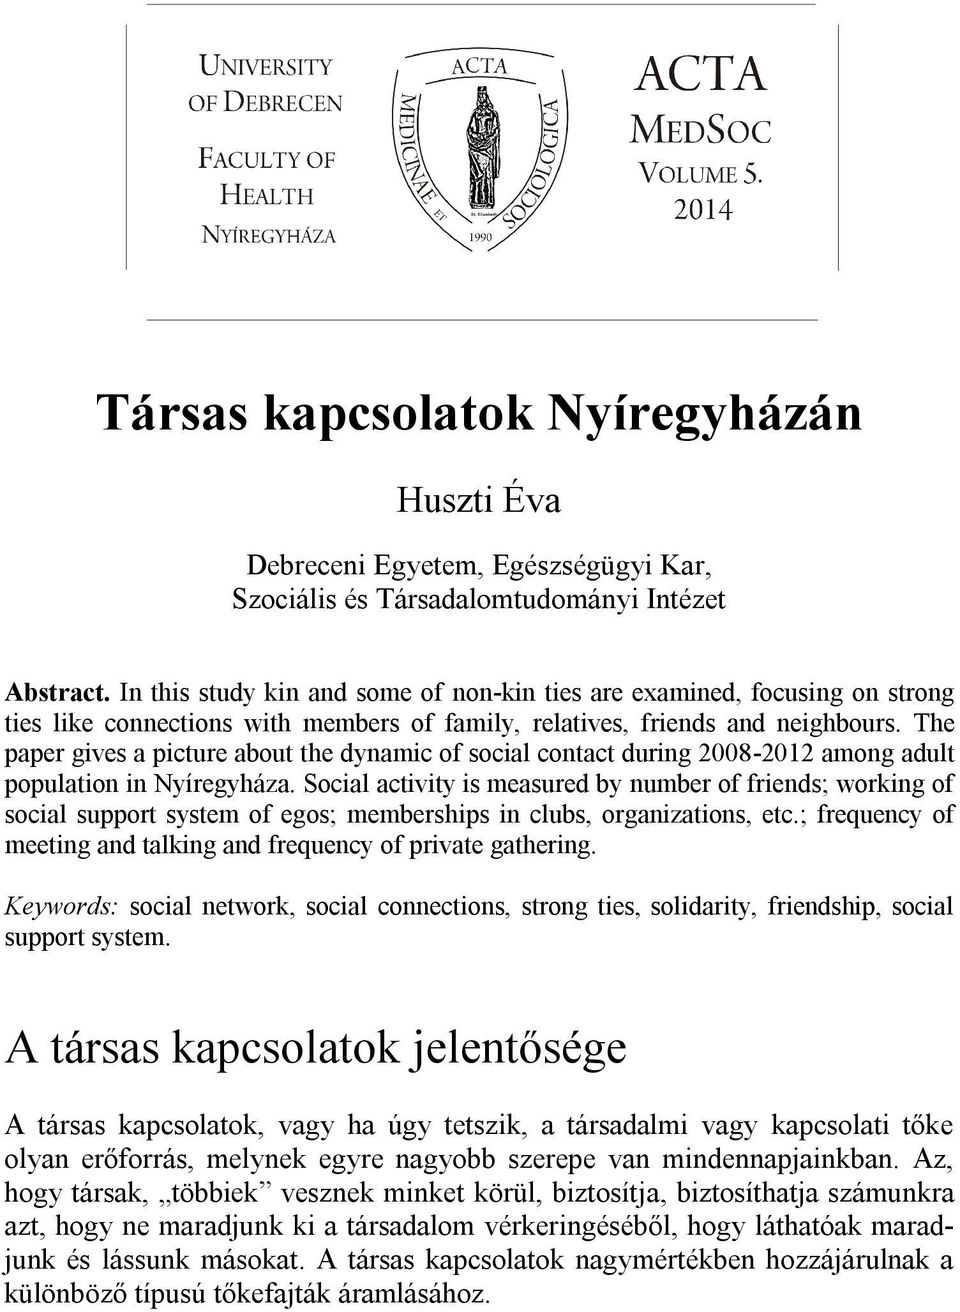 The paper gives a picture about the dynamic of social contact during 2008-2012 among adult population in Nyíregyháza.